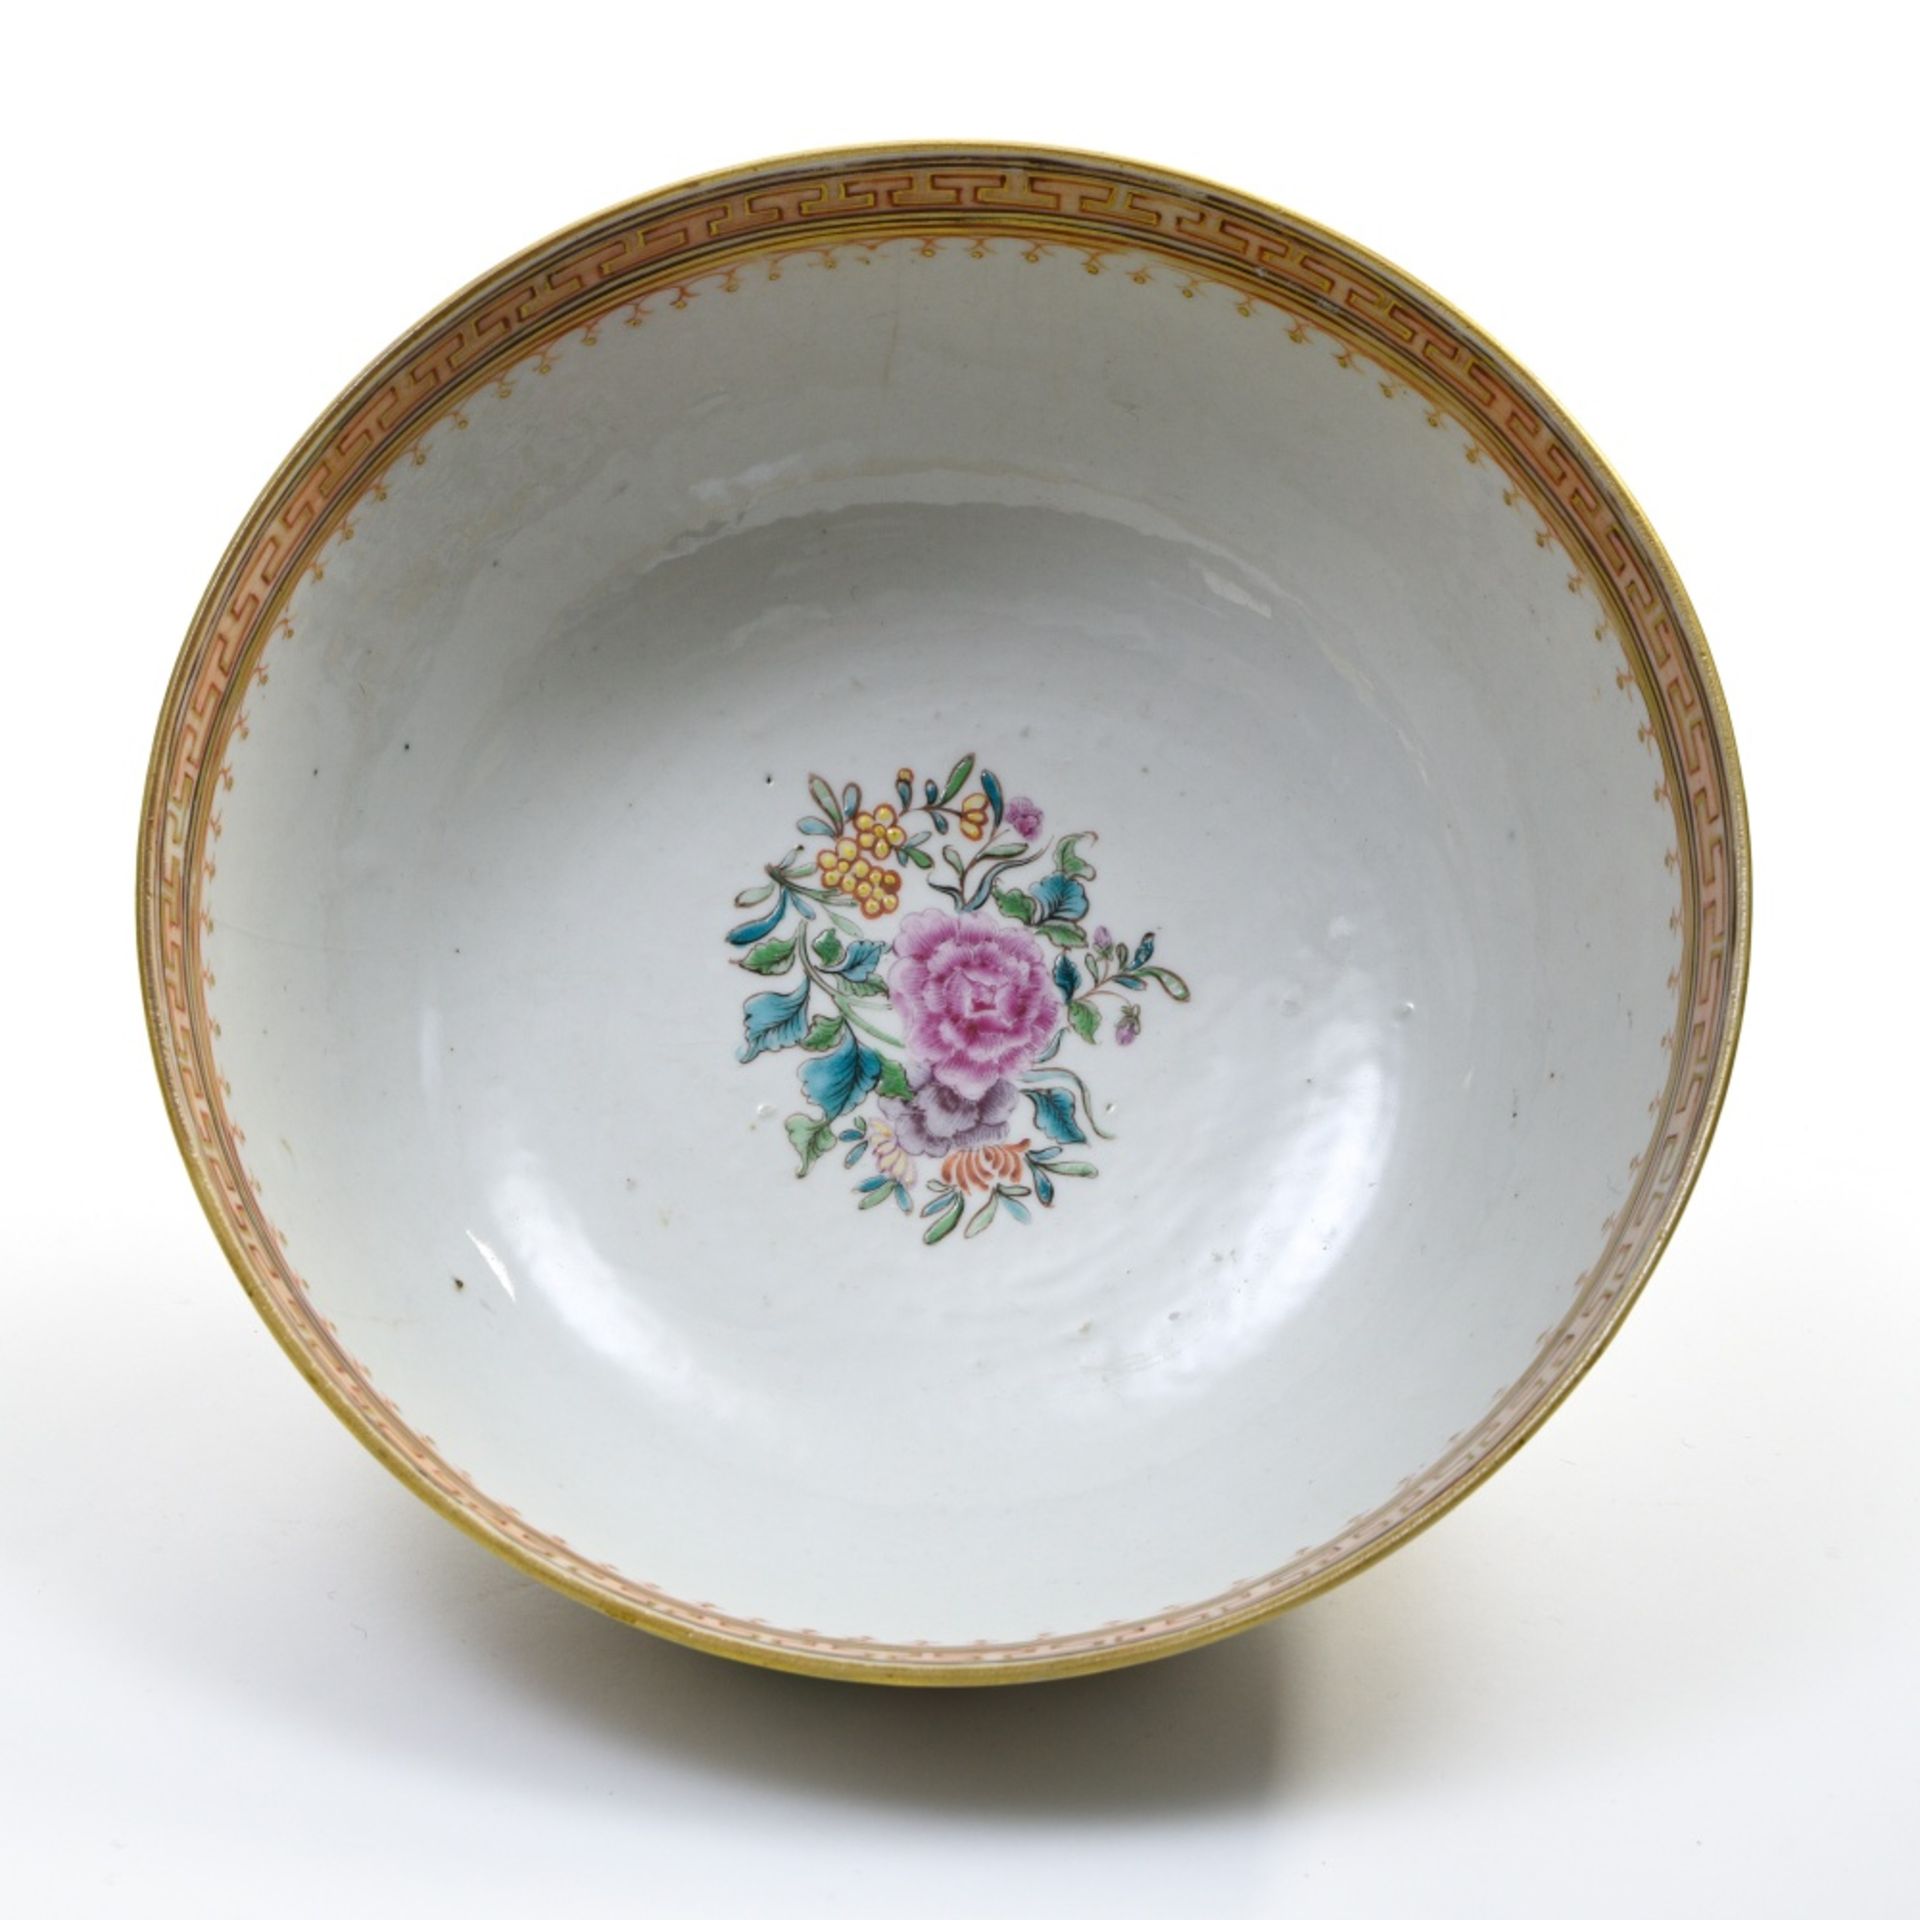 China, 18th century Large flared bowl, Porcelain, with Famille Rose enamelled dŽcor of a banquet, - Image 6 of 7